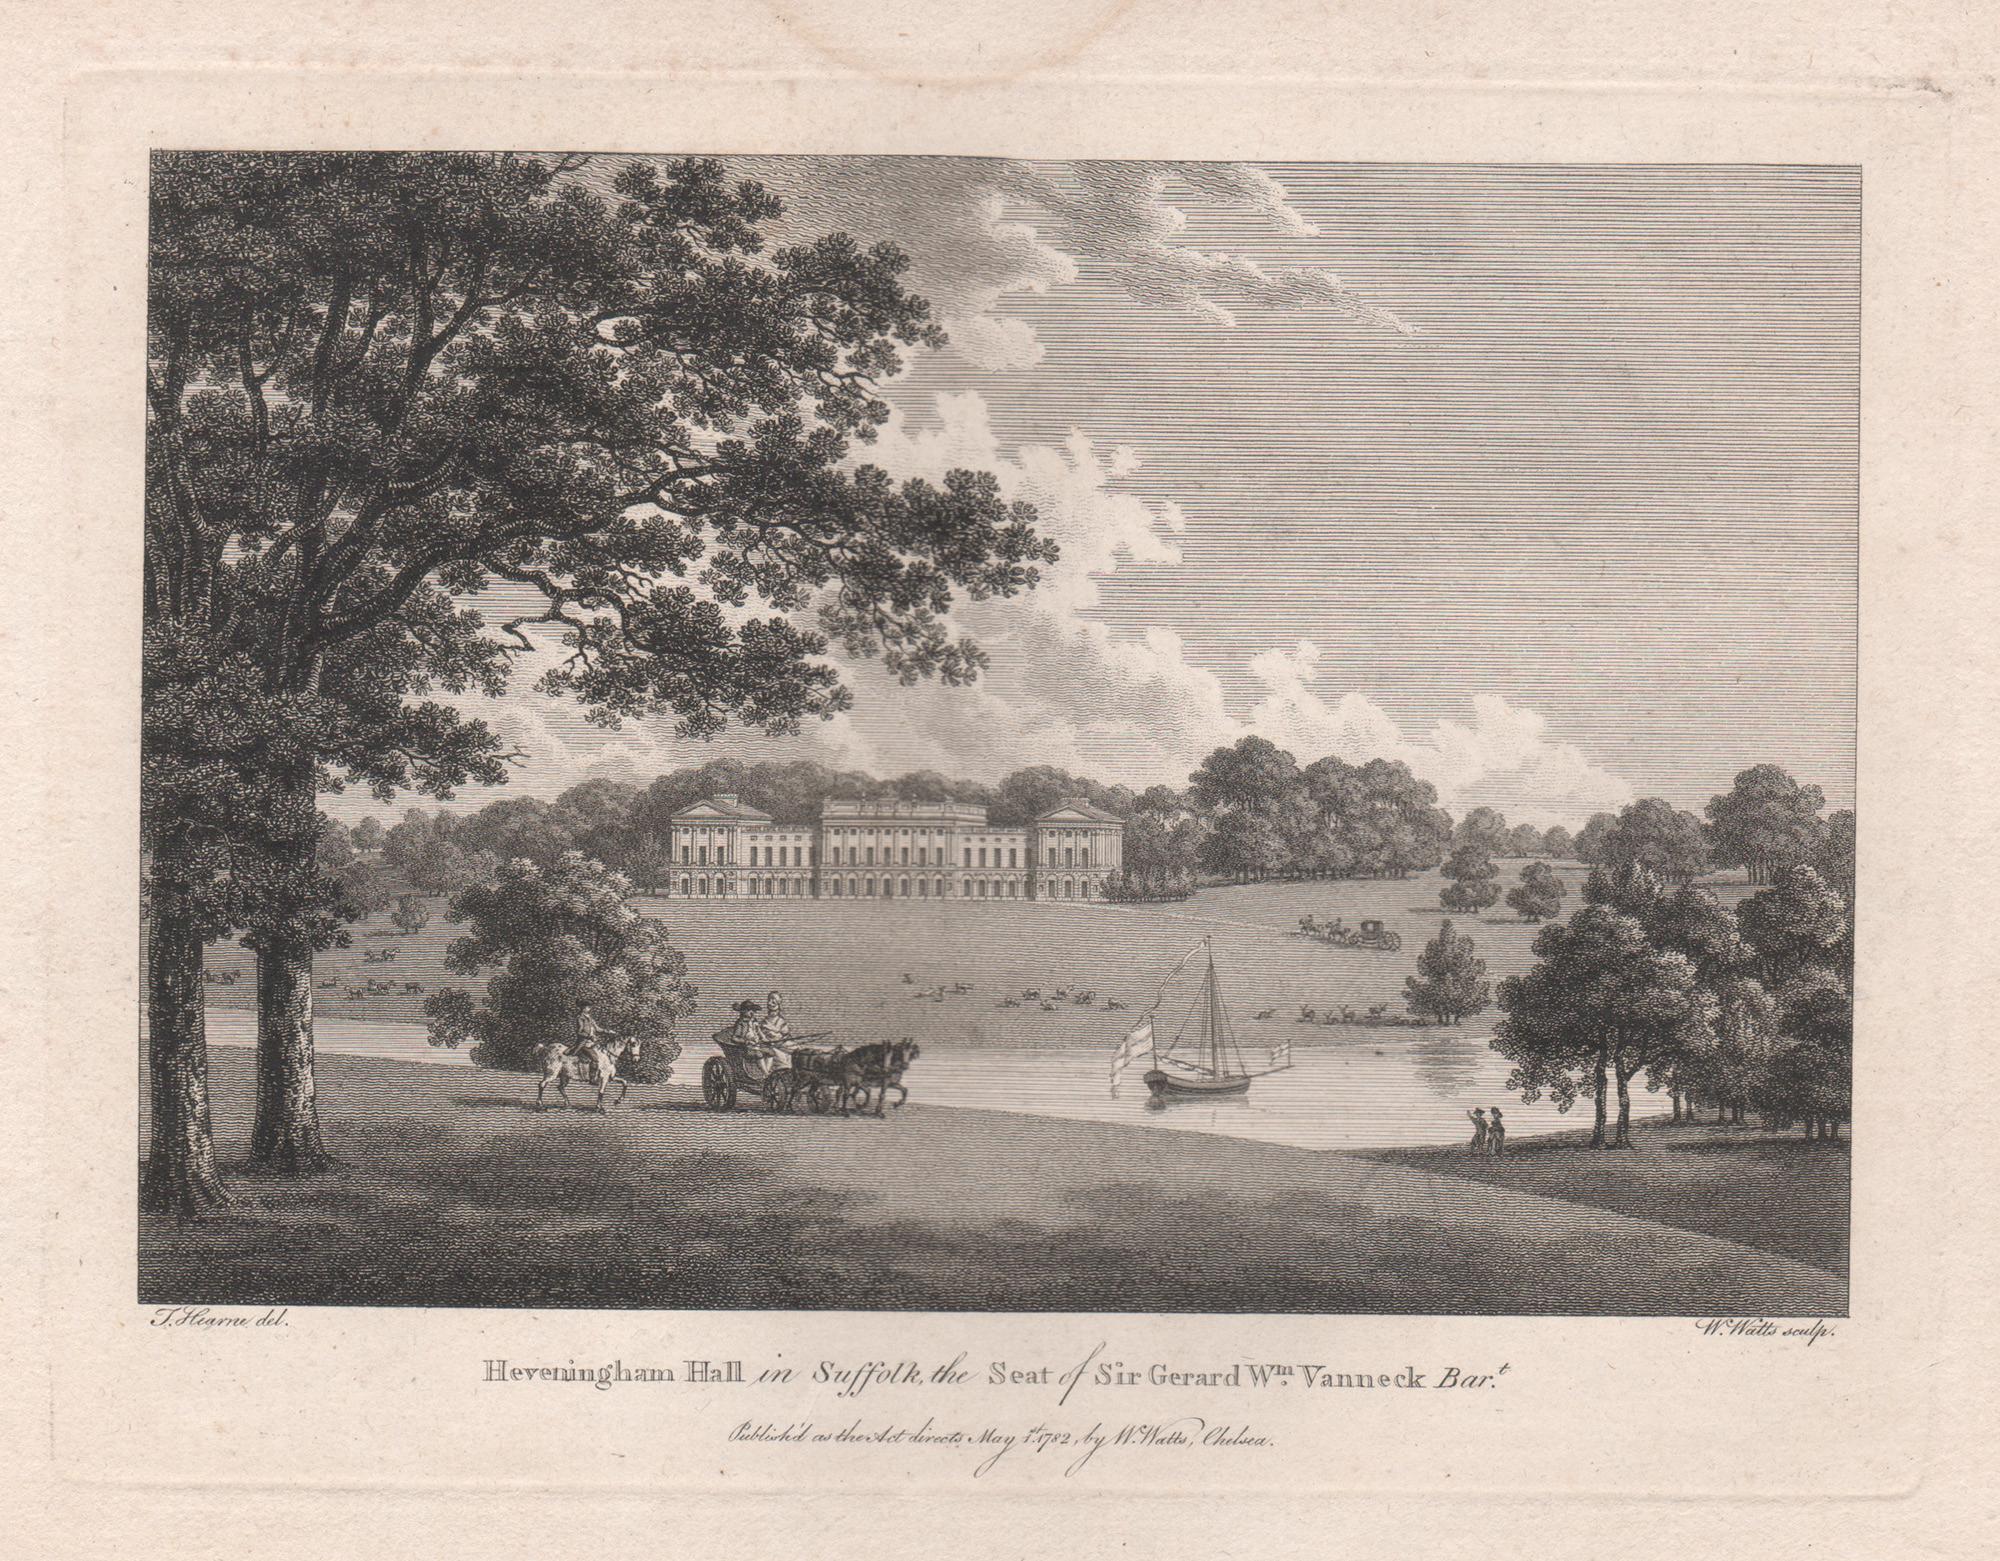 William Watts Landscape Print - Heveningham Hall in Suffolk, 18th century English country house engraving, 1782